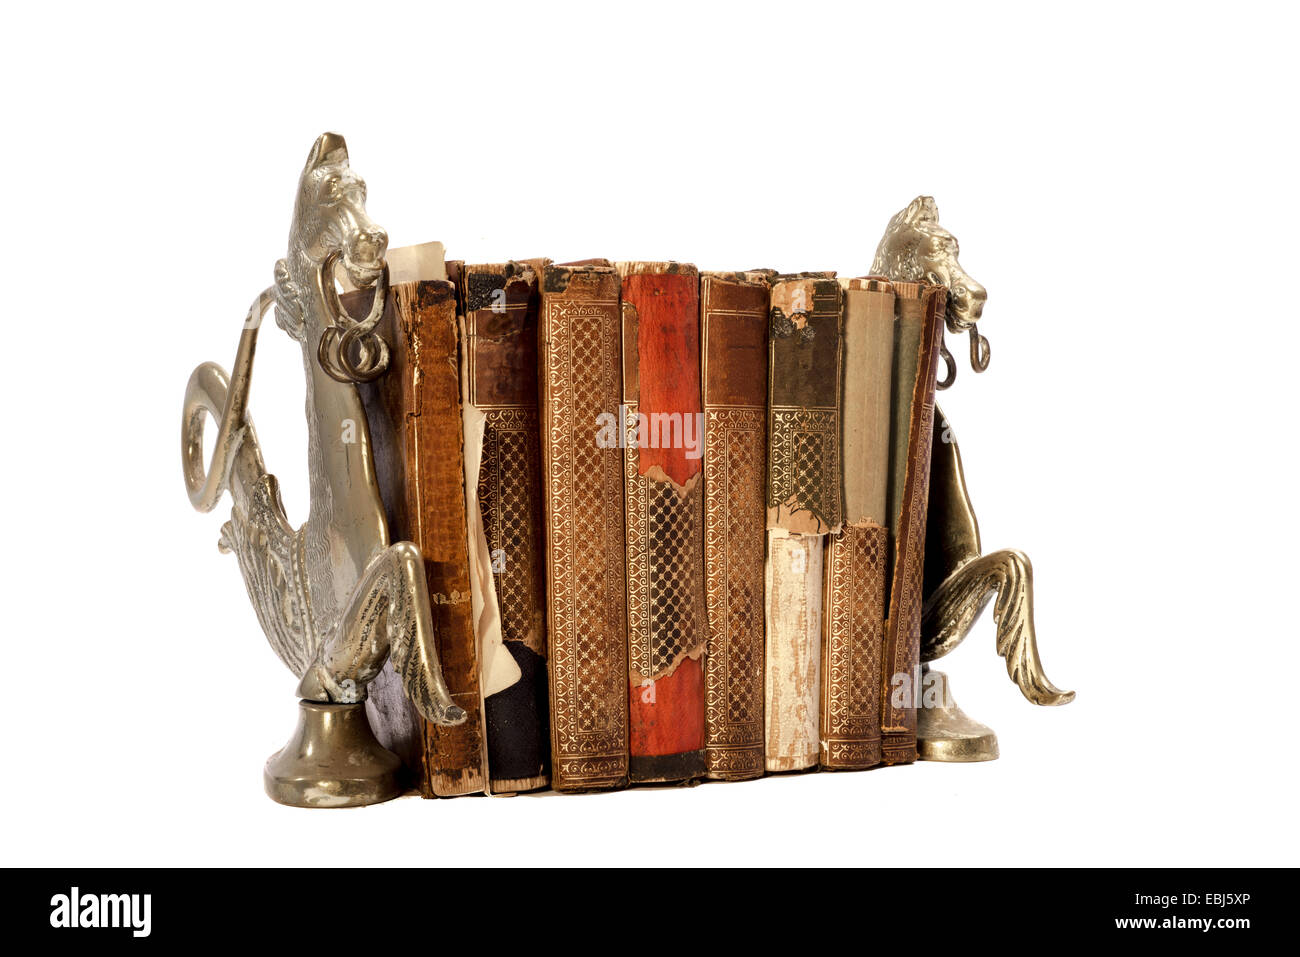 Eight old neglected and torn books between two book stands made of copper and resembling horses, photographed on an isolated whi Stock Photo